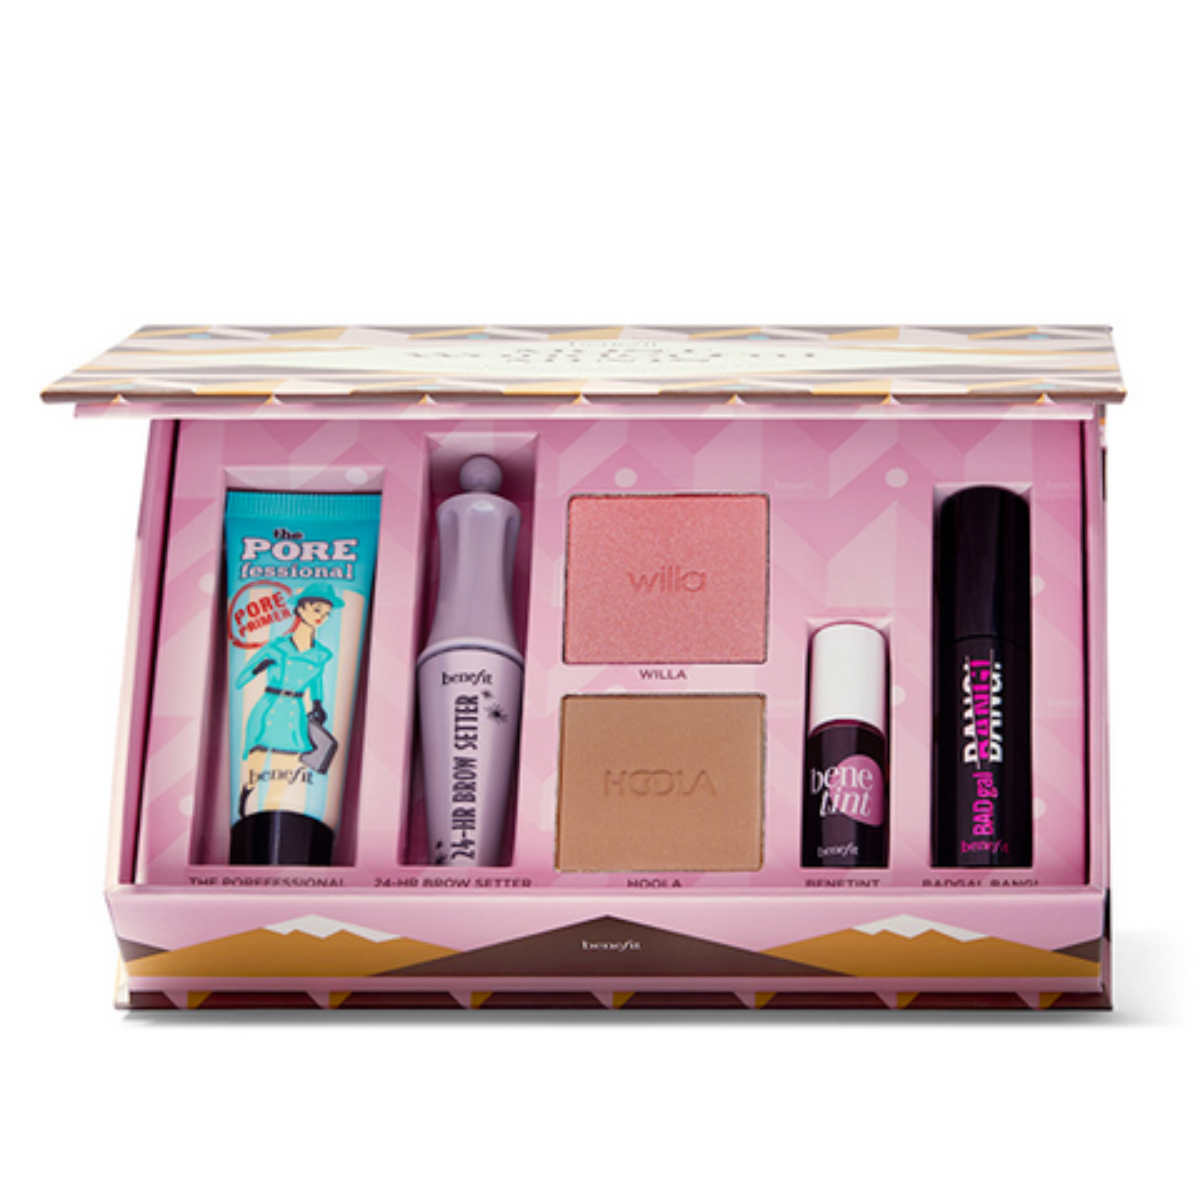 Benefit Holiday Full Face Kit